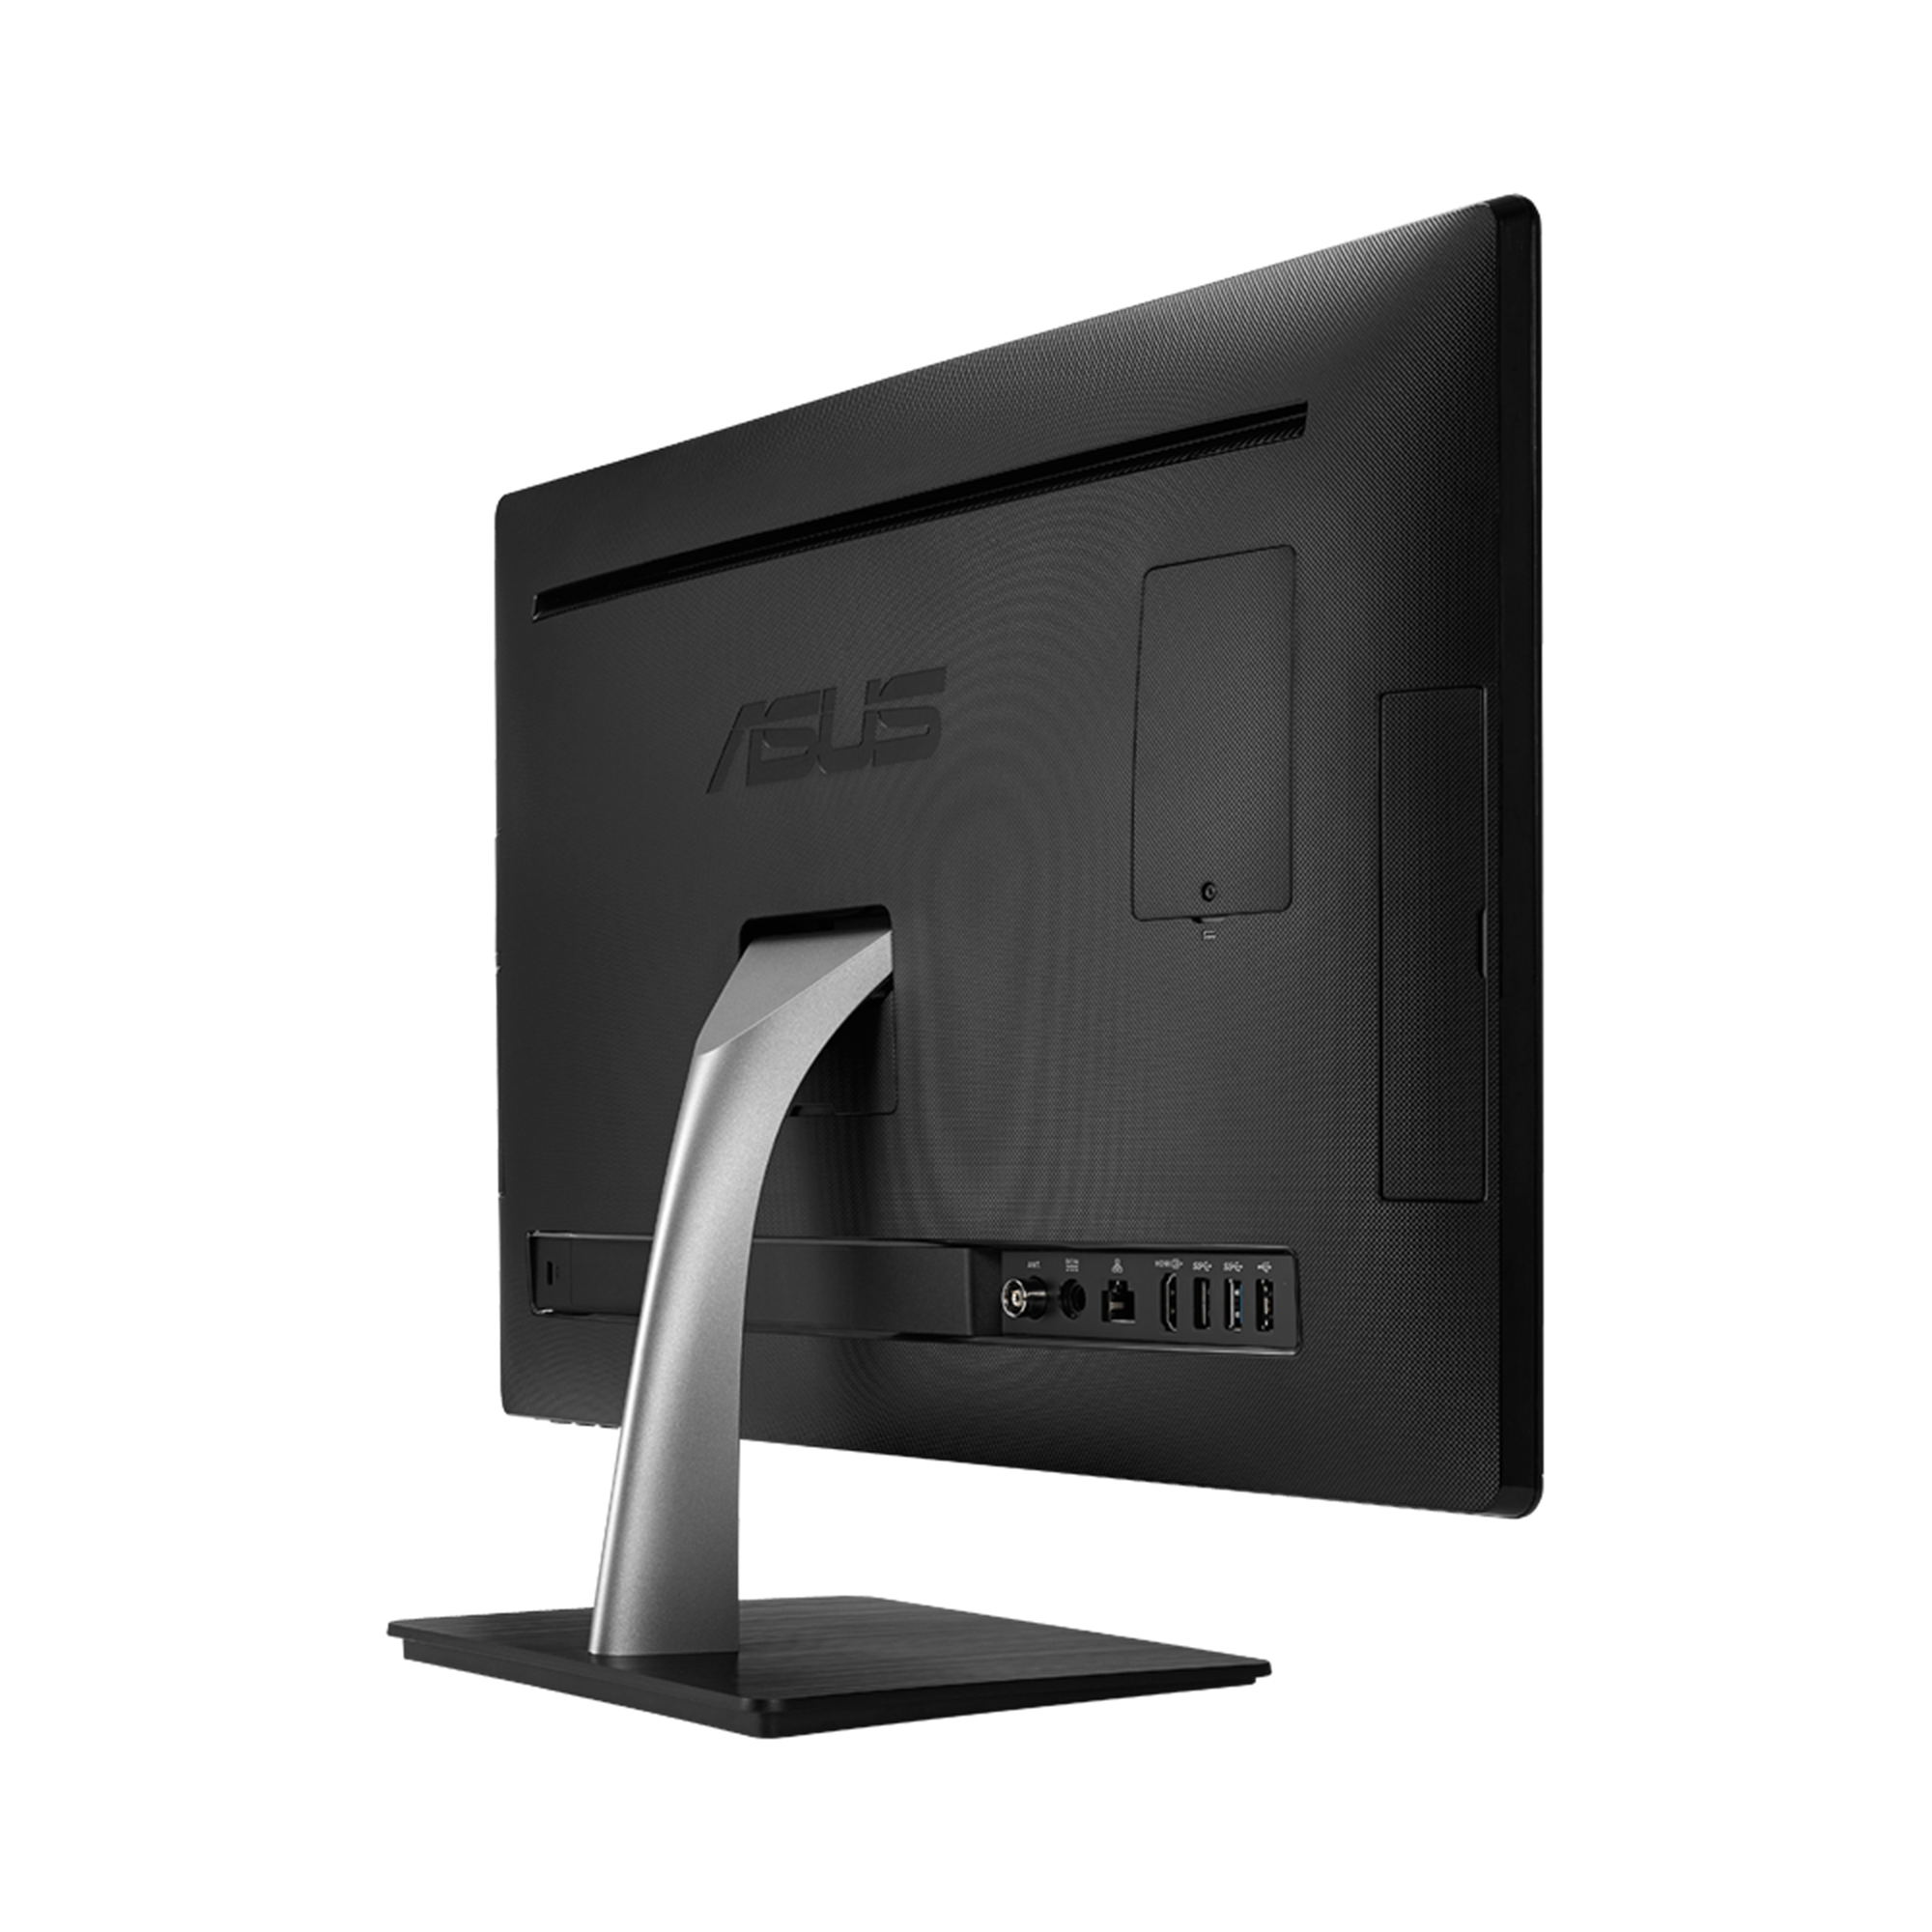 ASUS All-in-One PC/ V220IA core i3-5005U